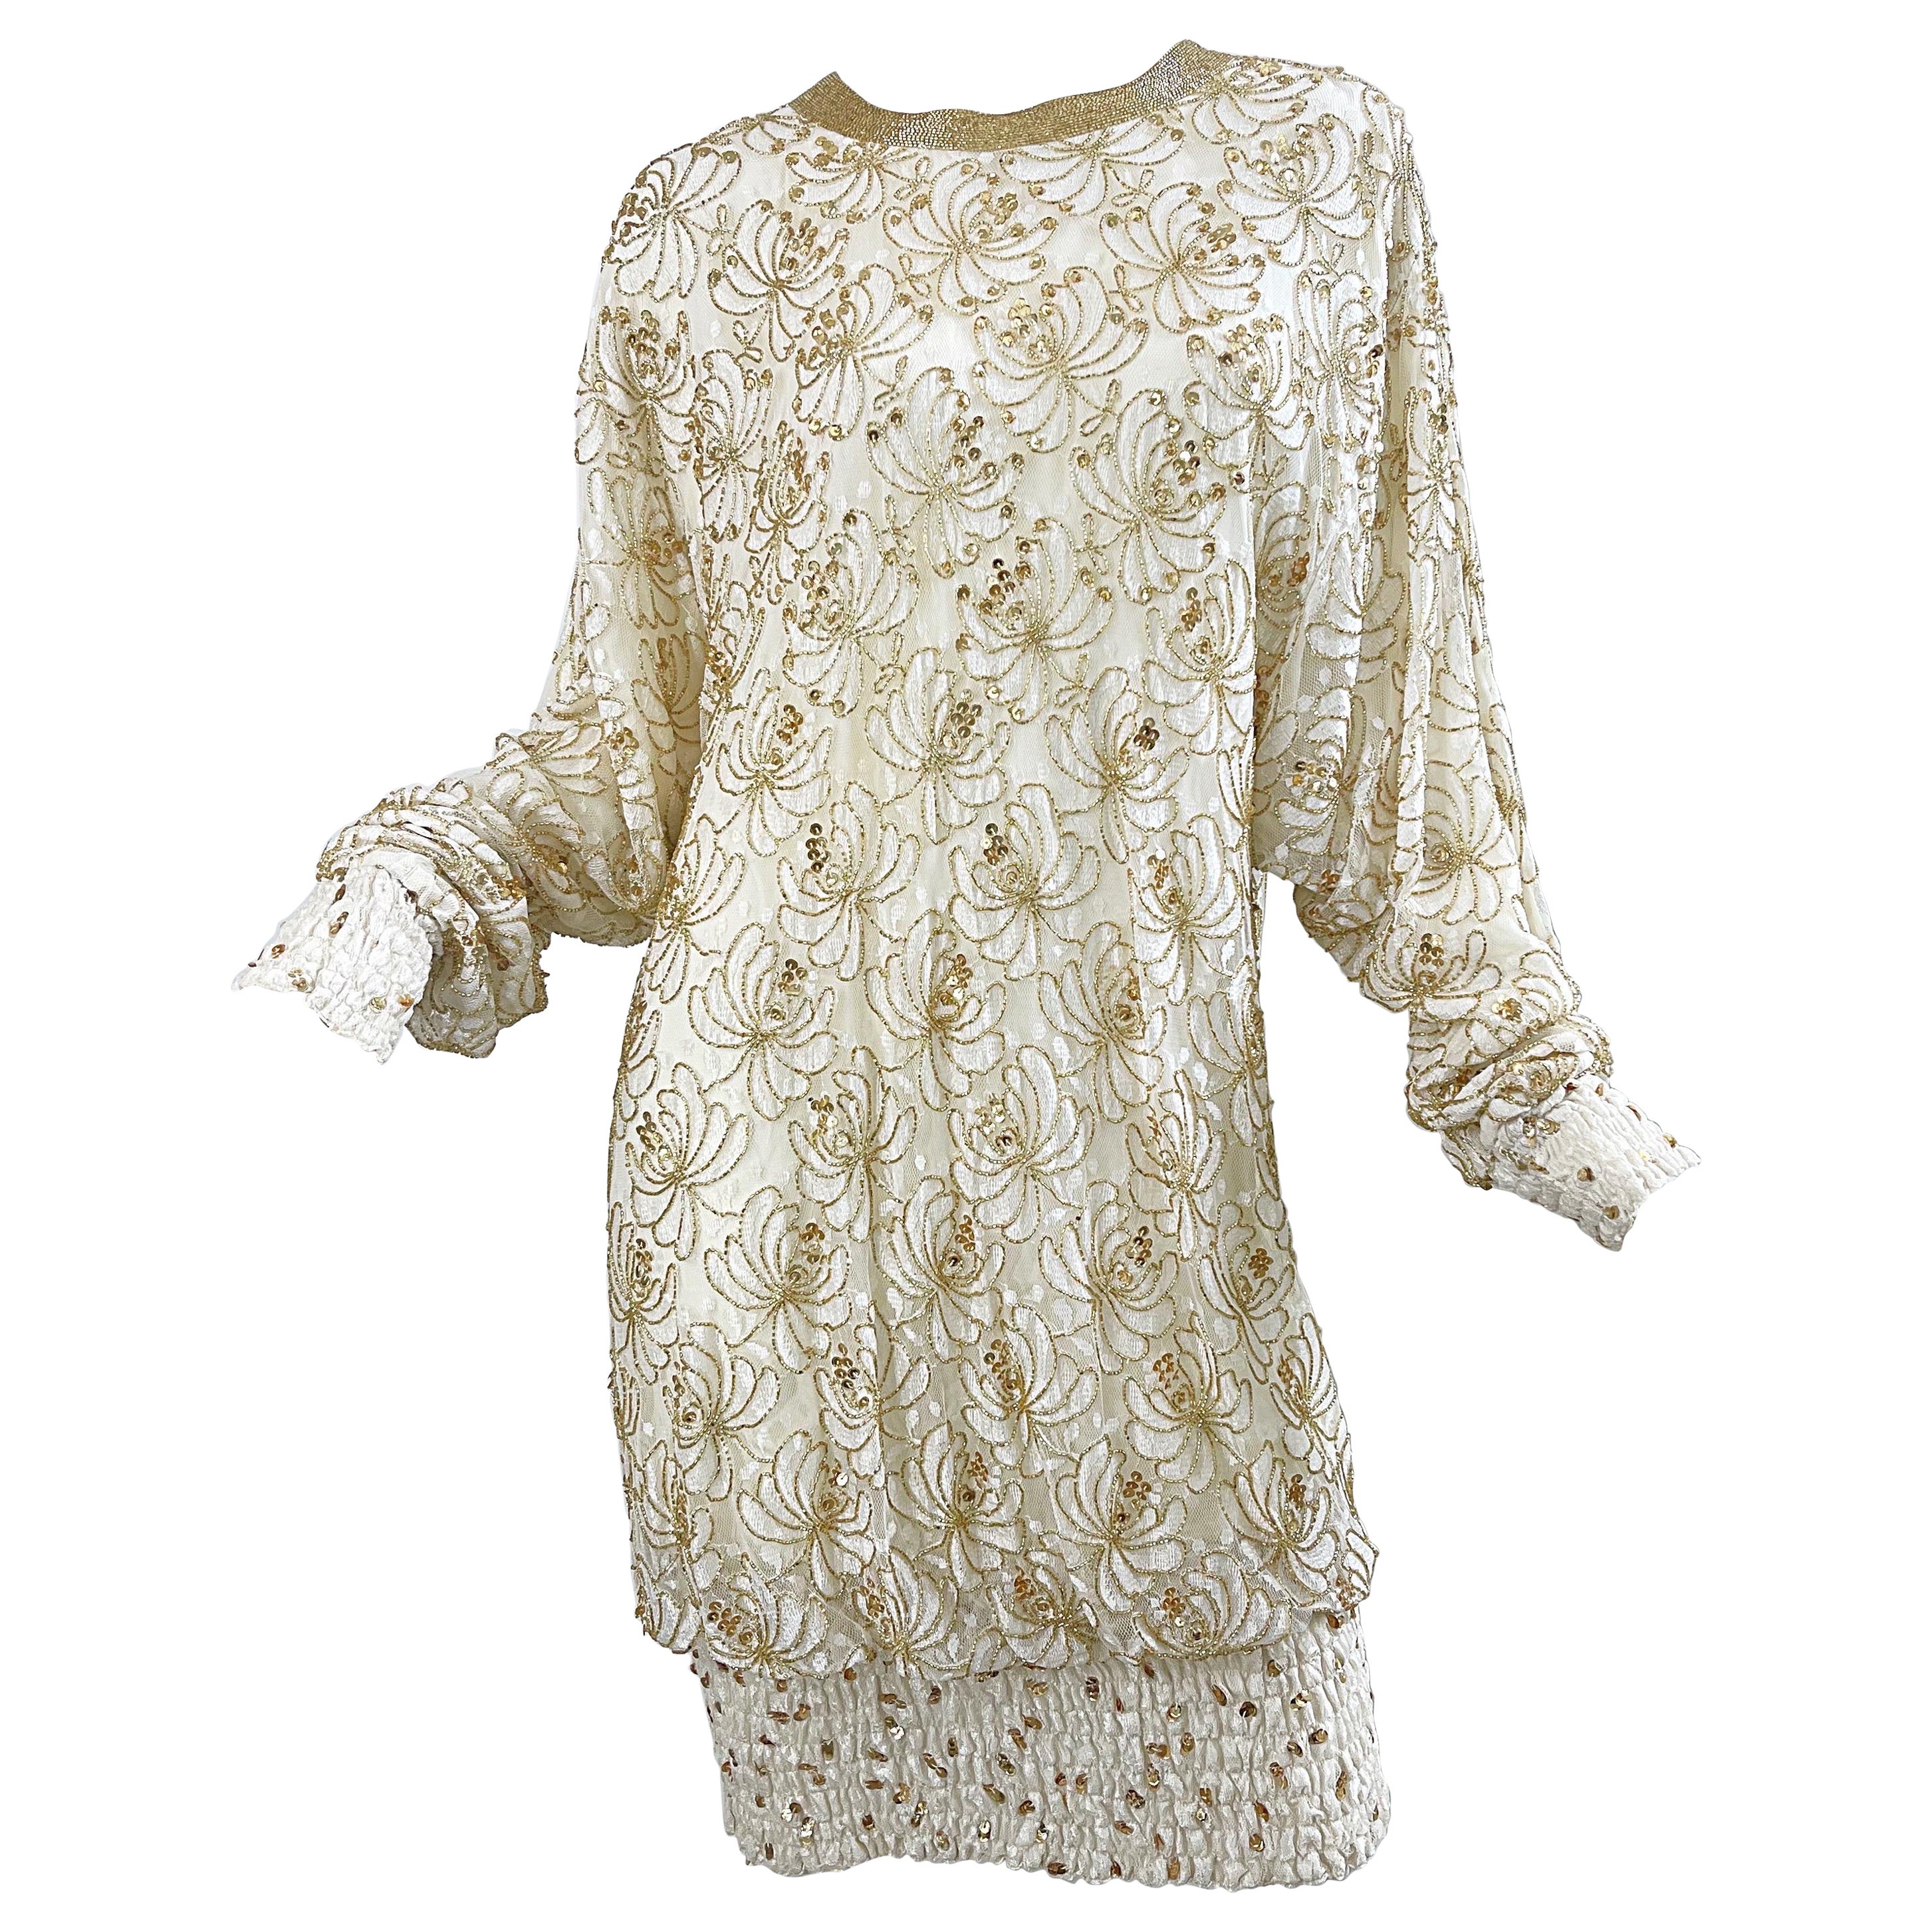 Lillie Rubin 1980s Ivory Off White + Gold Lace Sequin Beaded Vintage 80s Dress For Sale